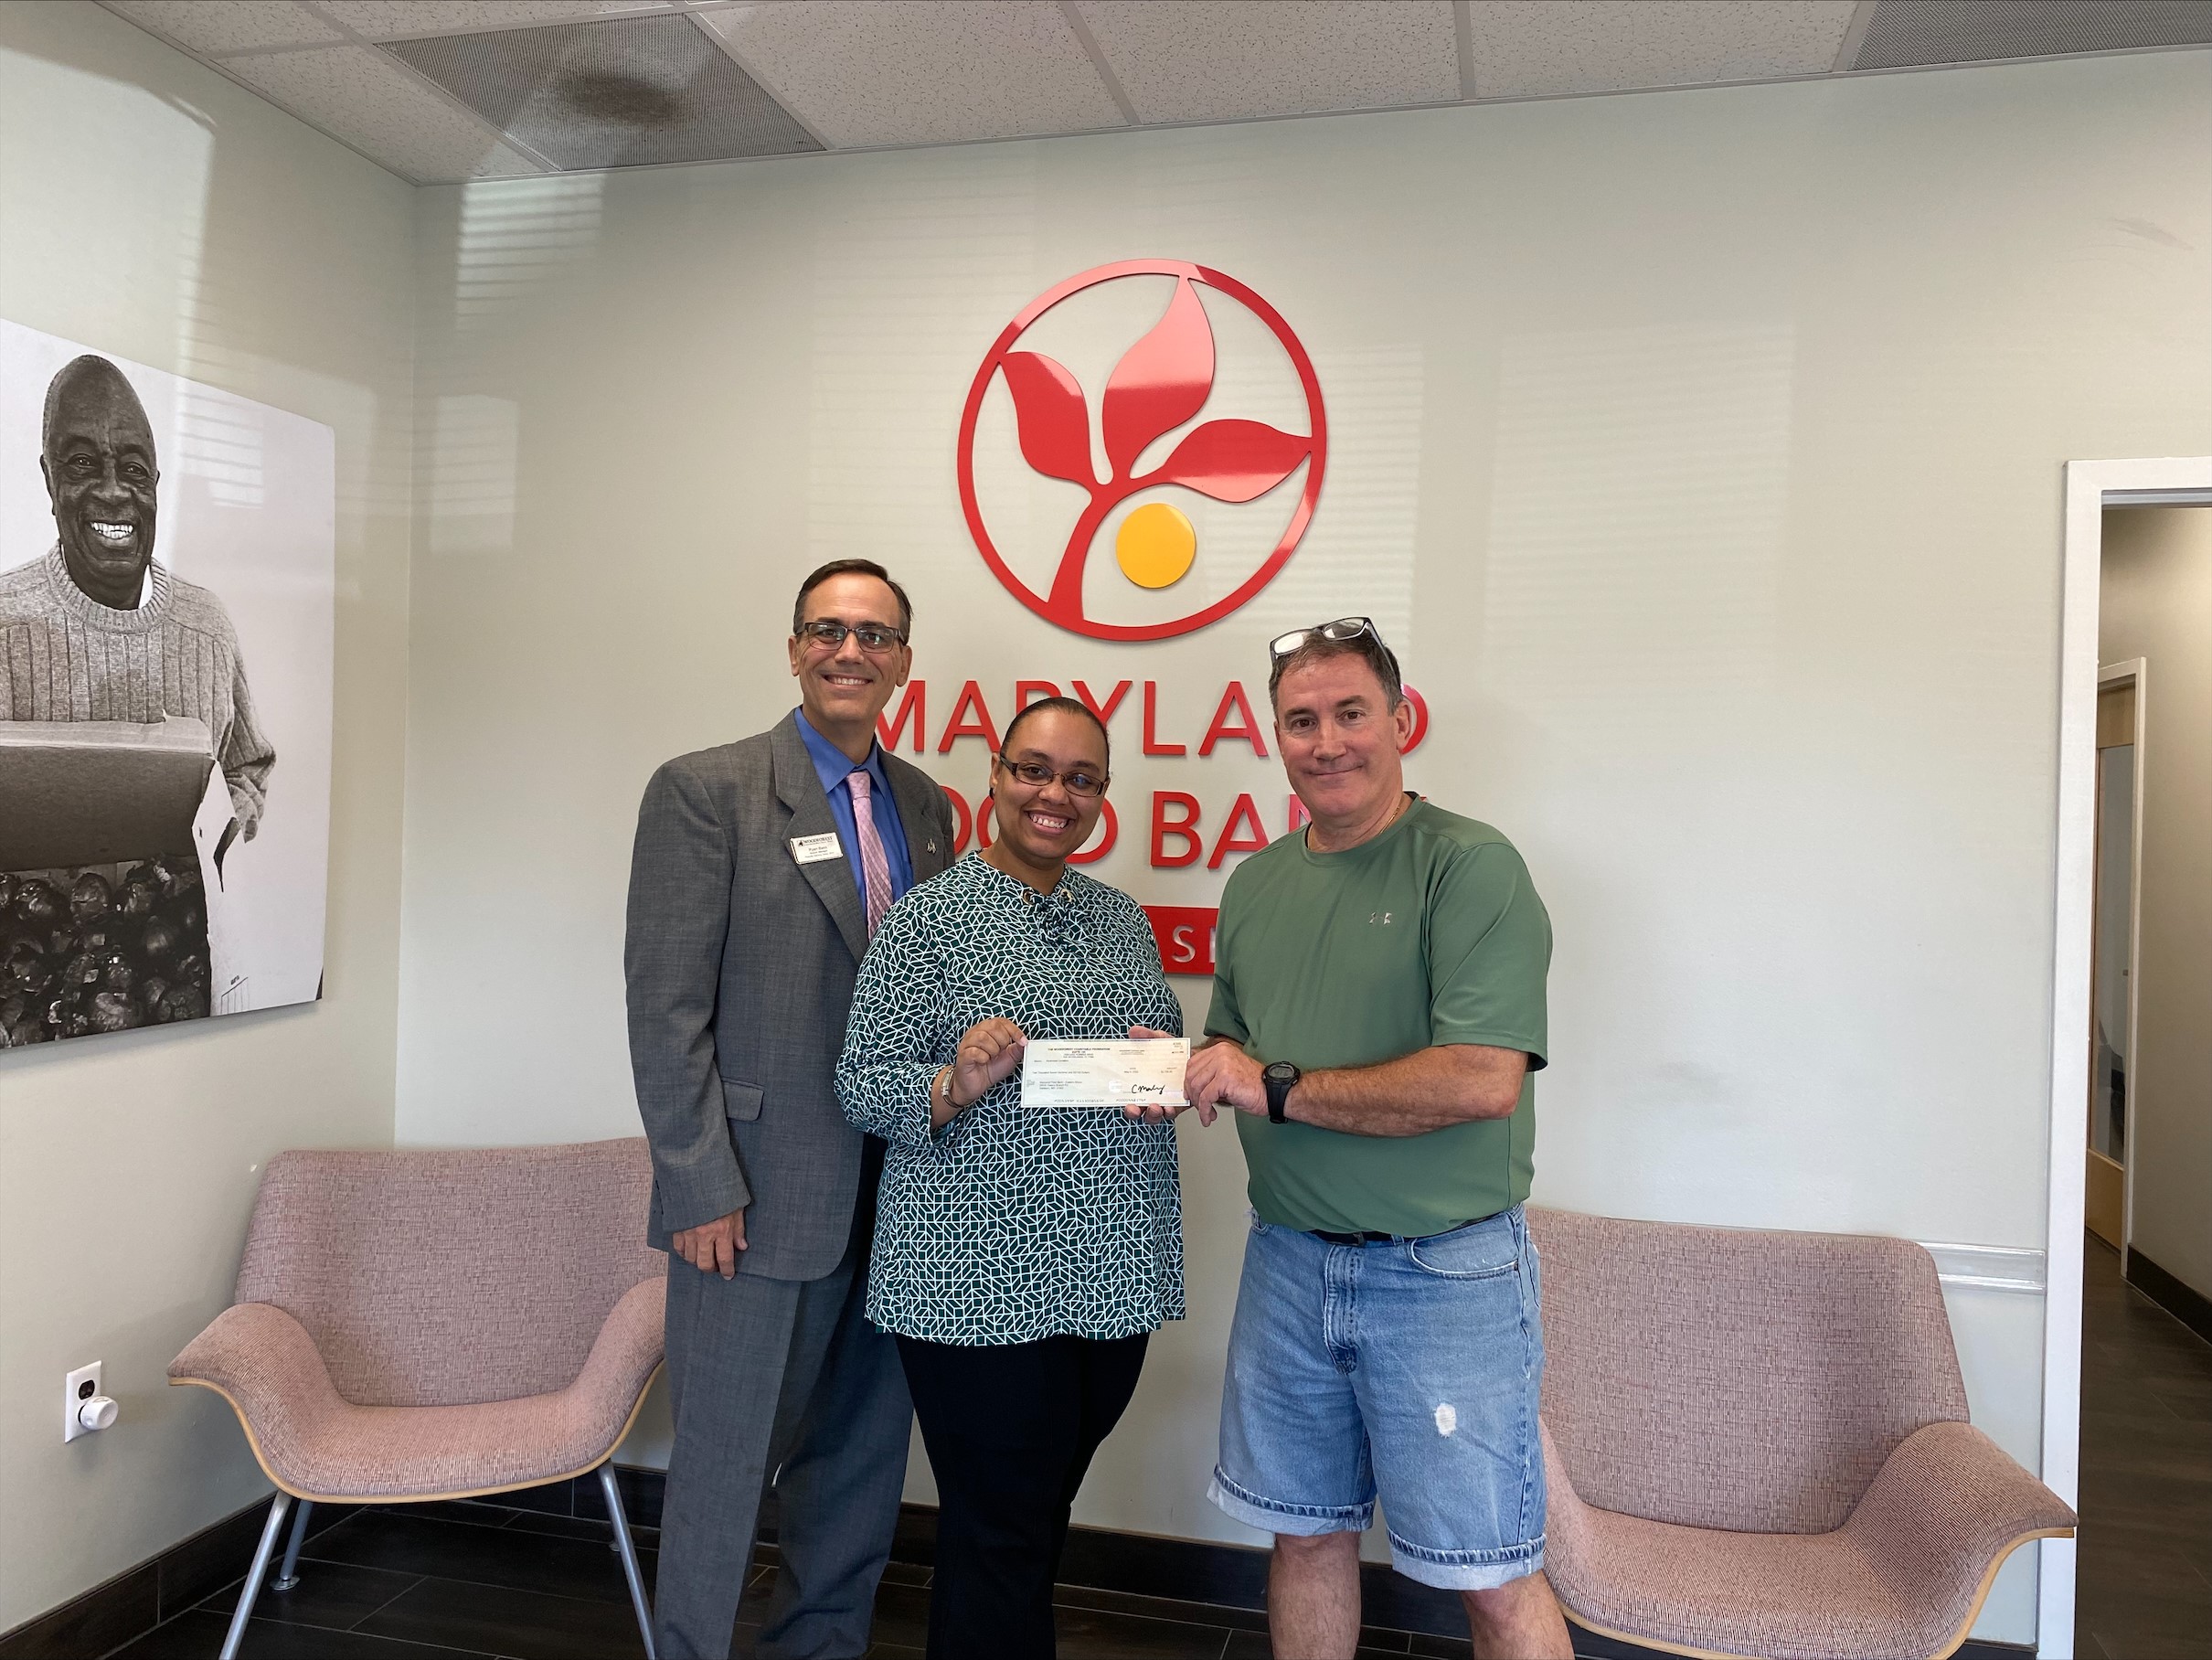 Maryland Food Bank received a $7,200.00 donation from WCF.